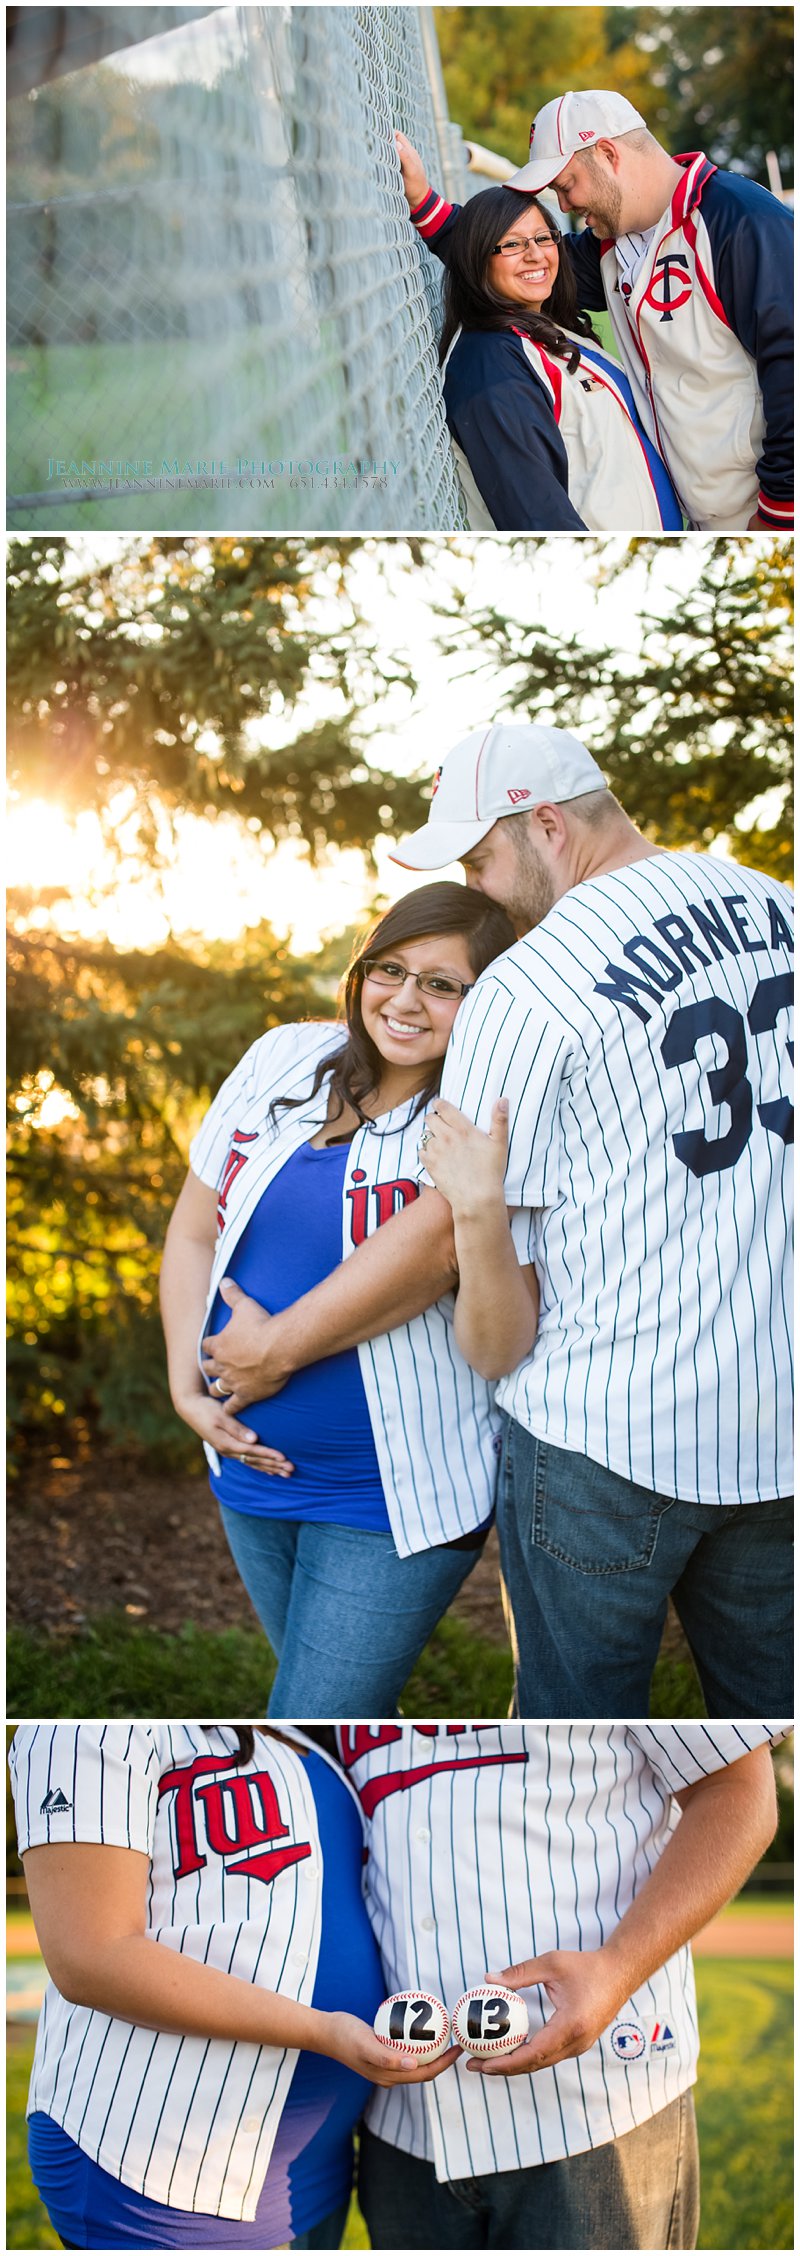 Twins maternity session, sports theme maternity session, jerseys, couple, maternity photos, baby bump, baseballs, Twins maternity session, Minnesota maternity session